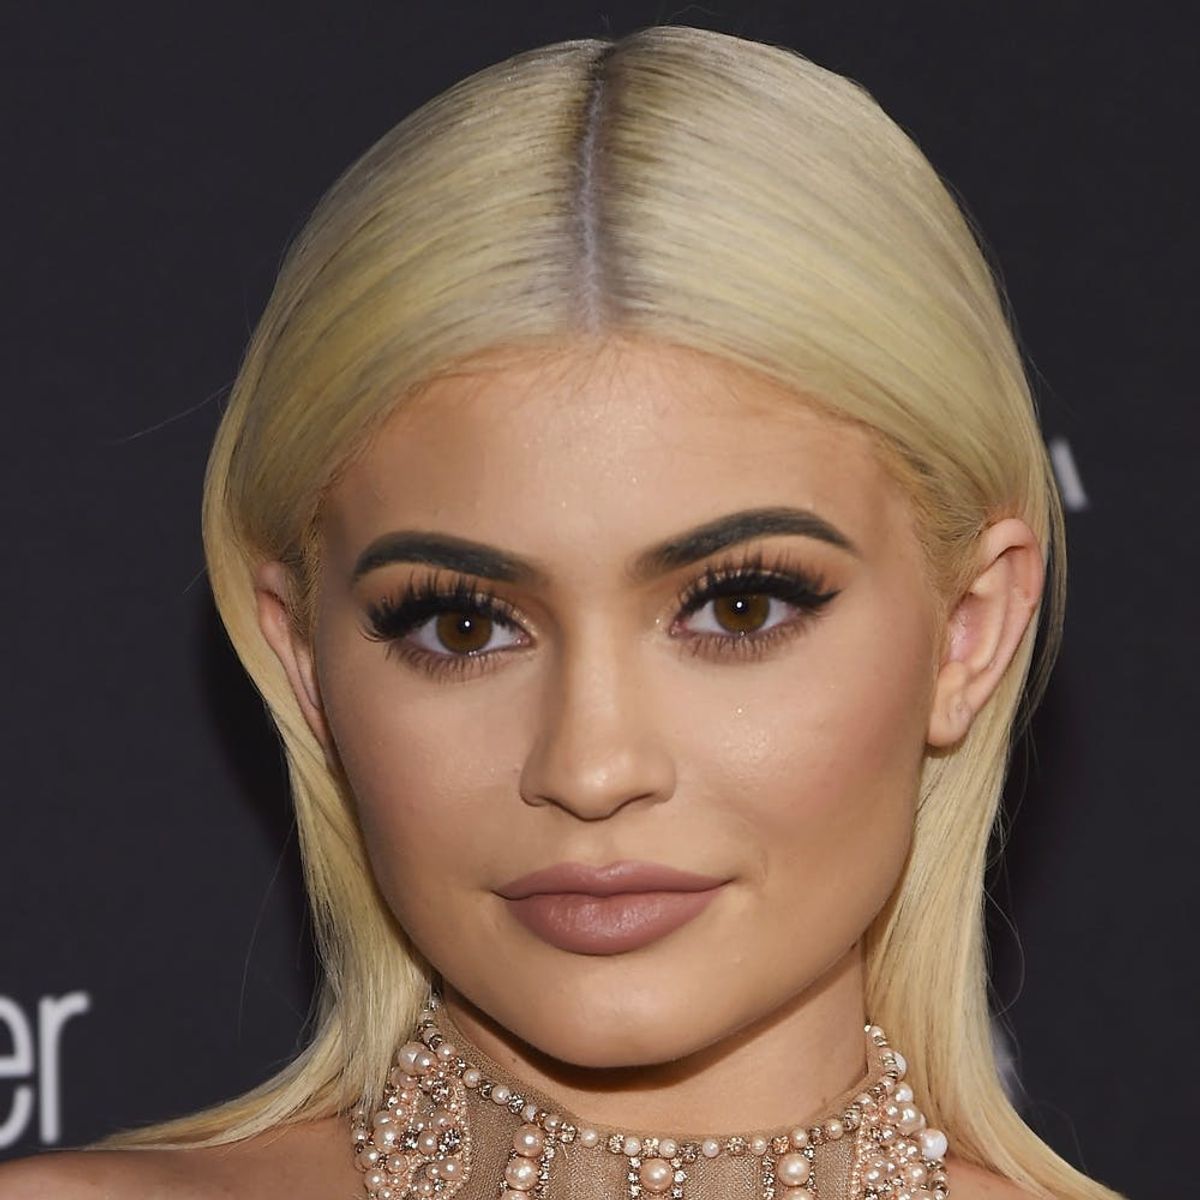 Kylie Jenner Is Finally Responding to All Those Colour Pop Beauty Rumors